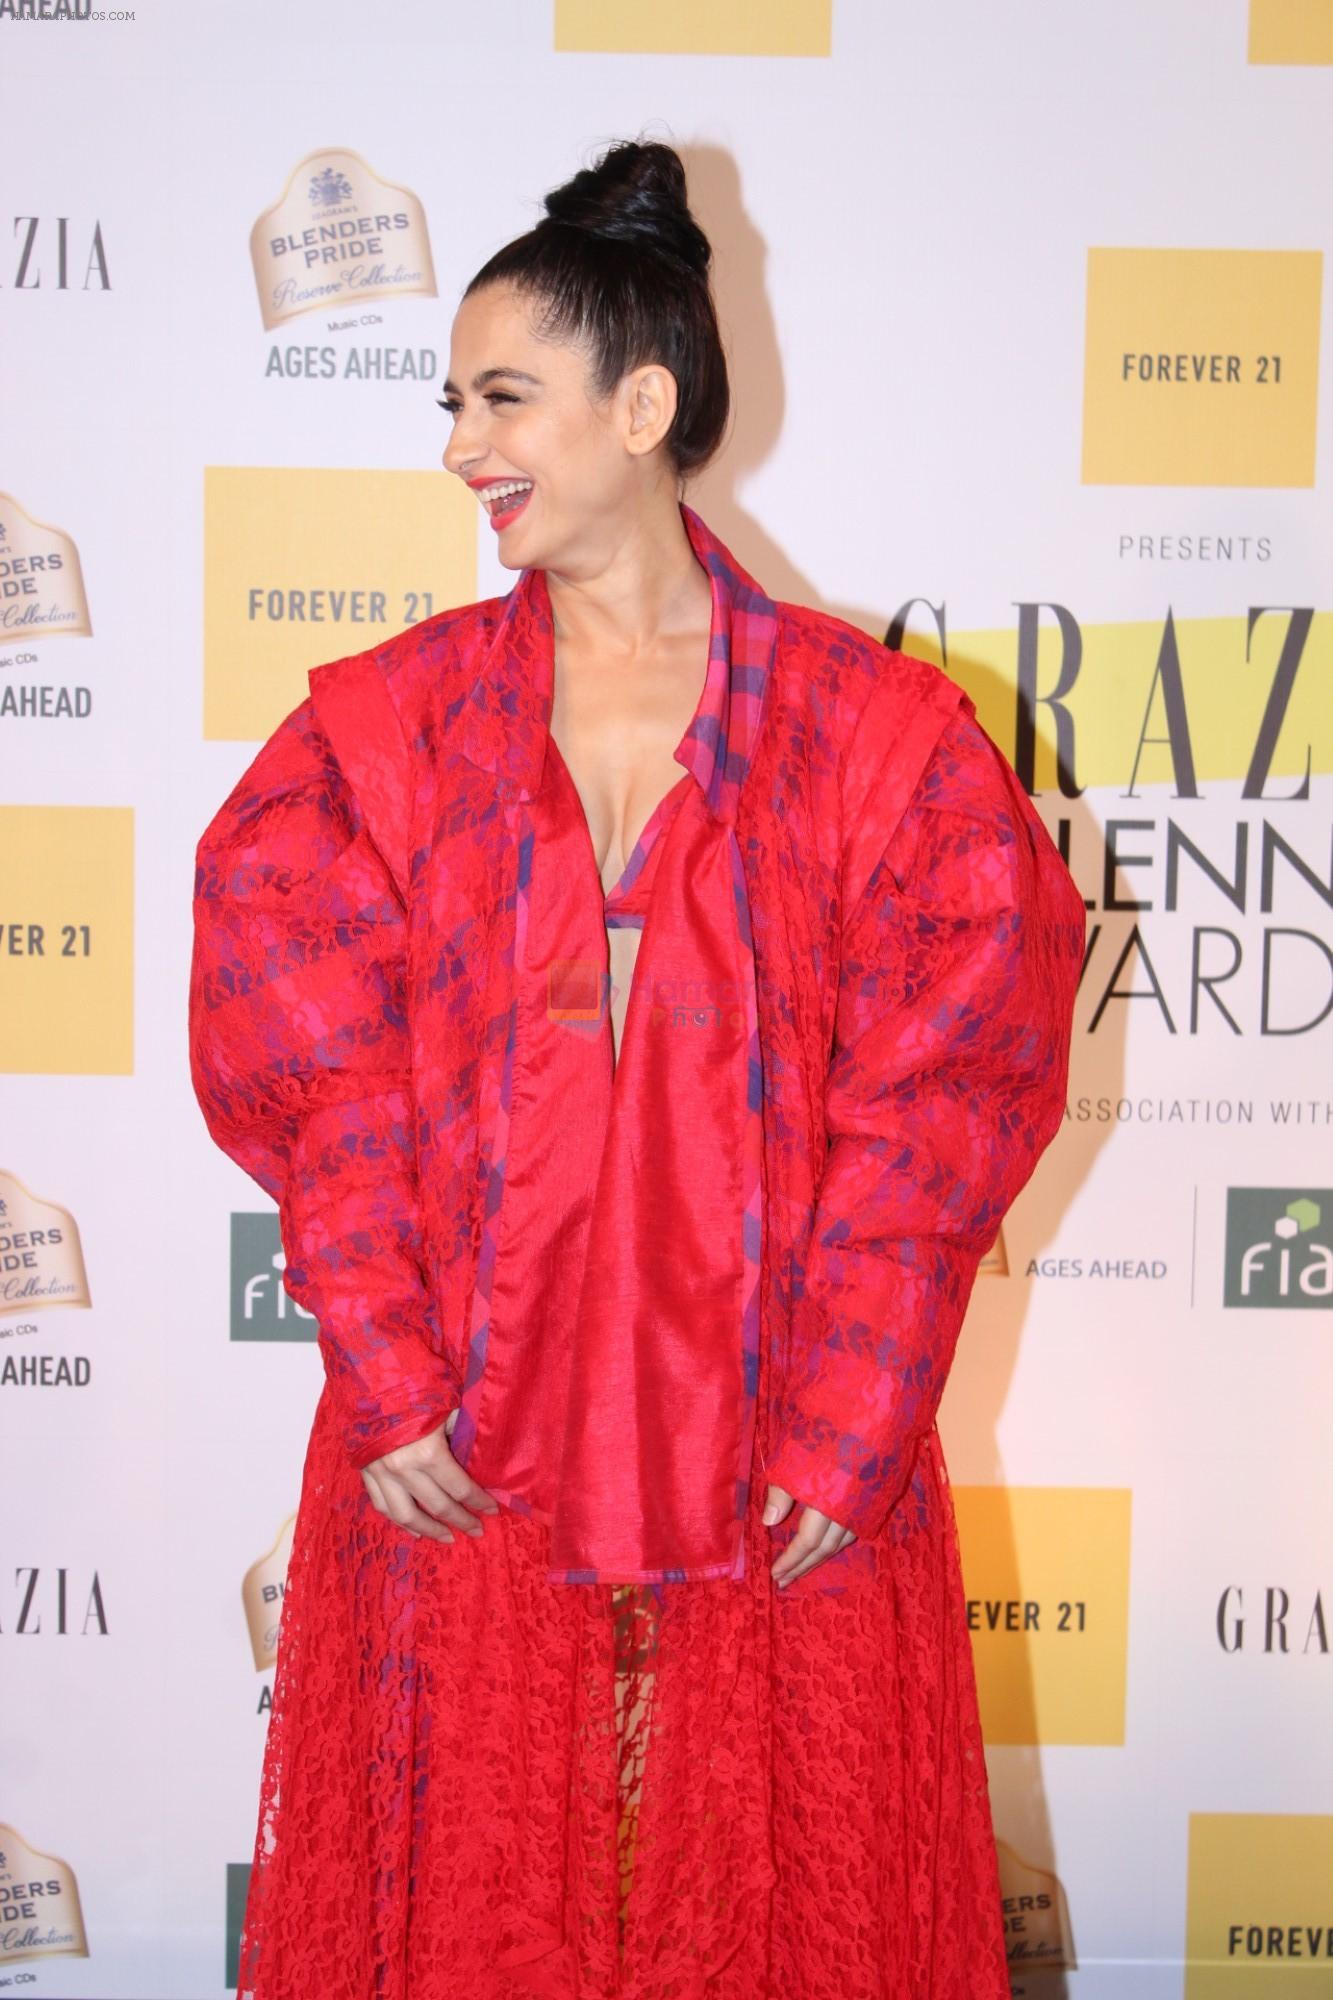 Sanjeeda Sheikh at the Red Carpet of 1st Edition of Grazia Millennial Awards on 19th June 2019